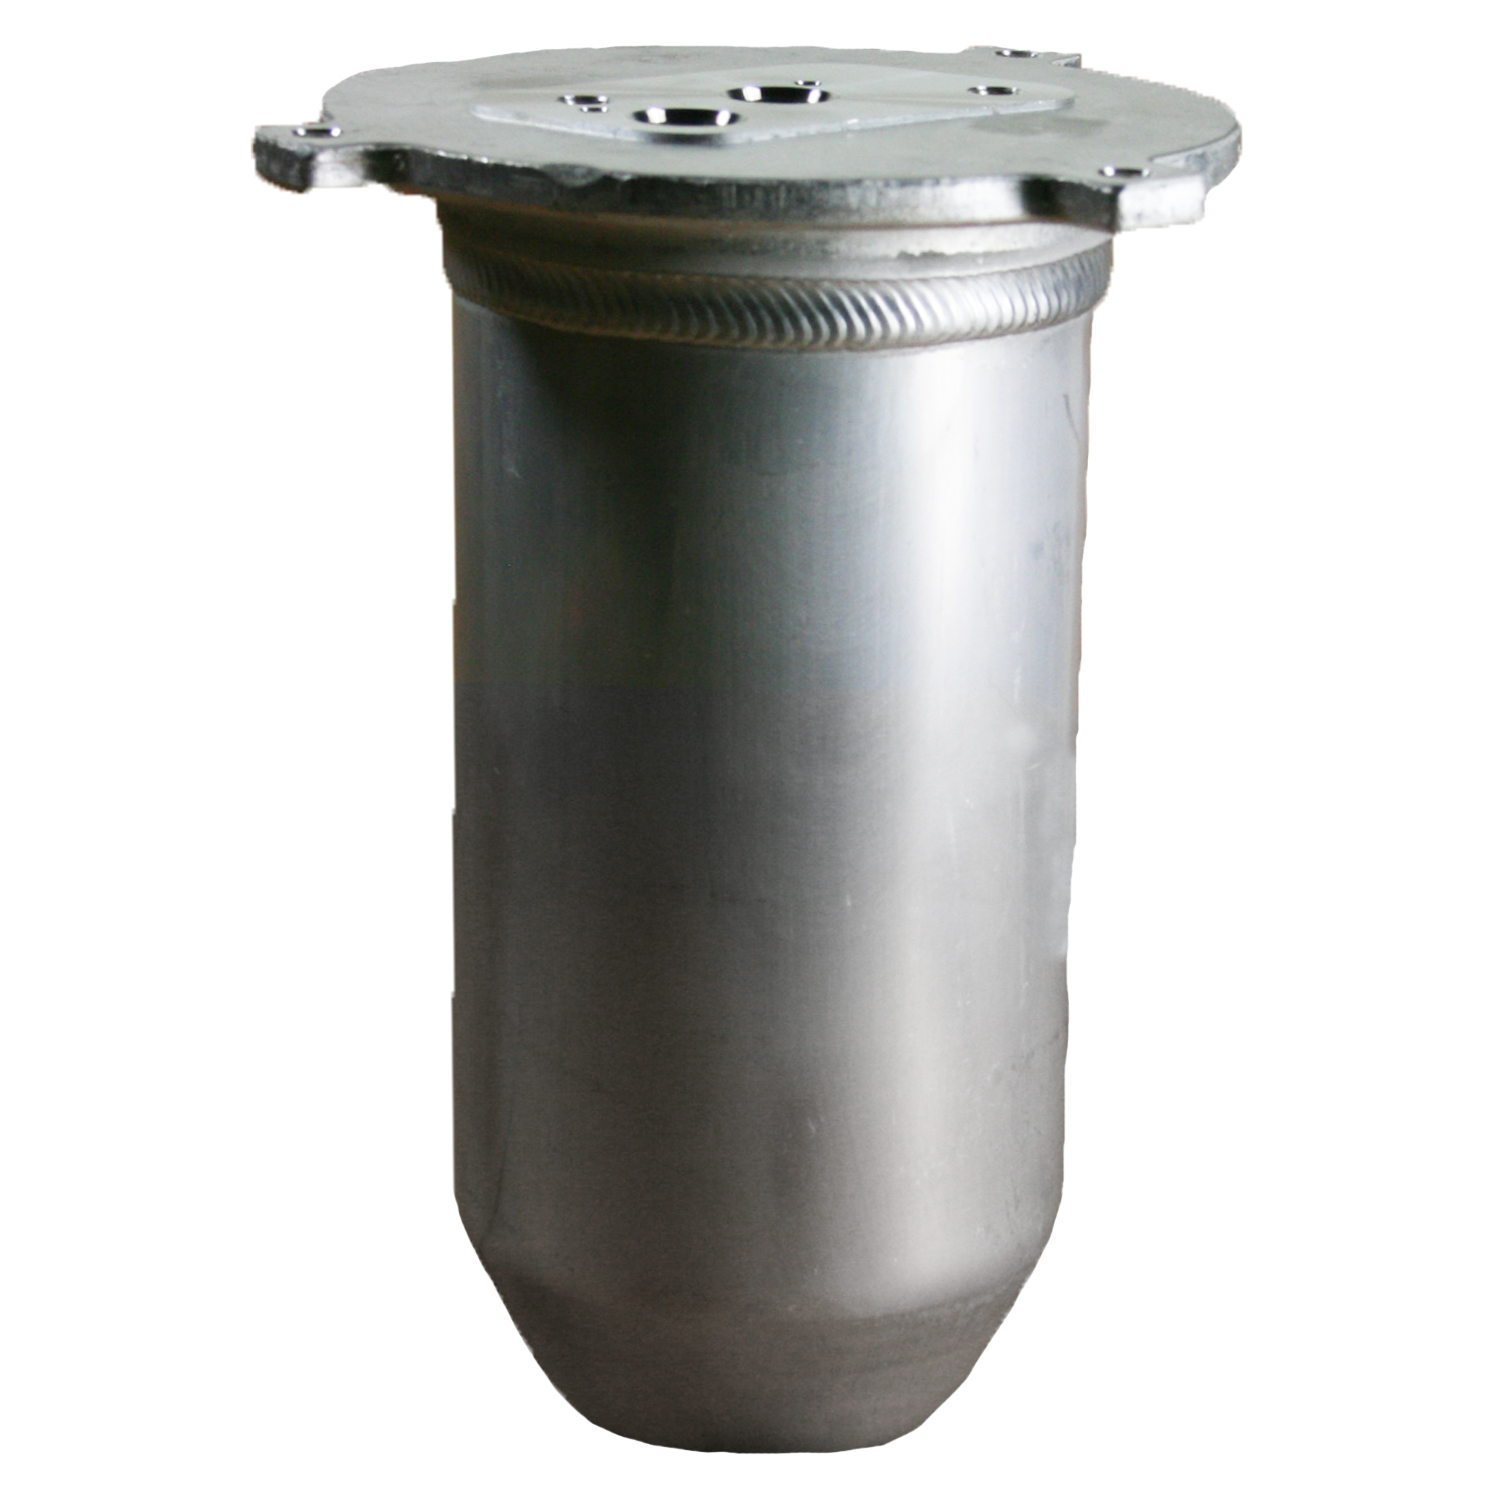 TCW Drier, Accumulator, or Desiccant 17-10139 New Product Image field_60b6a13a6e67c